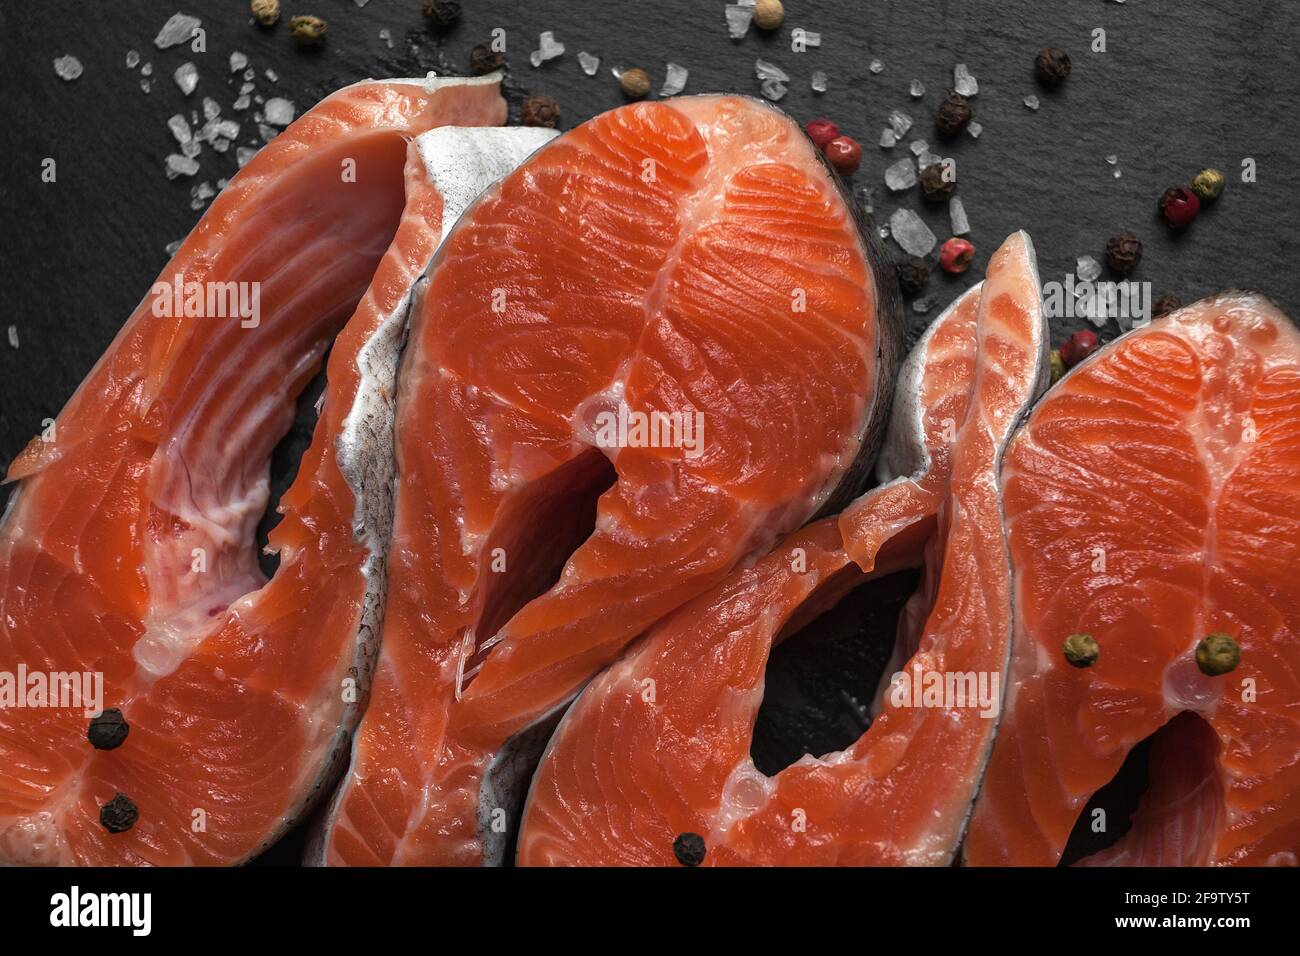 Fresh raw salmon steak with spices, prepared for grilling or roasting. Healthy seafood food.  Stock Photo